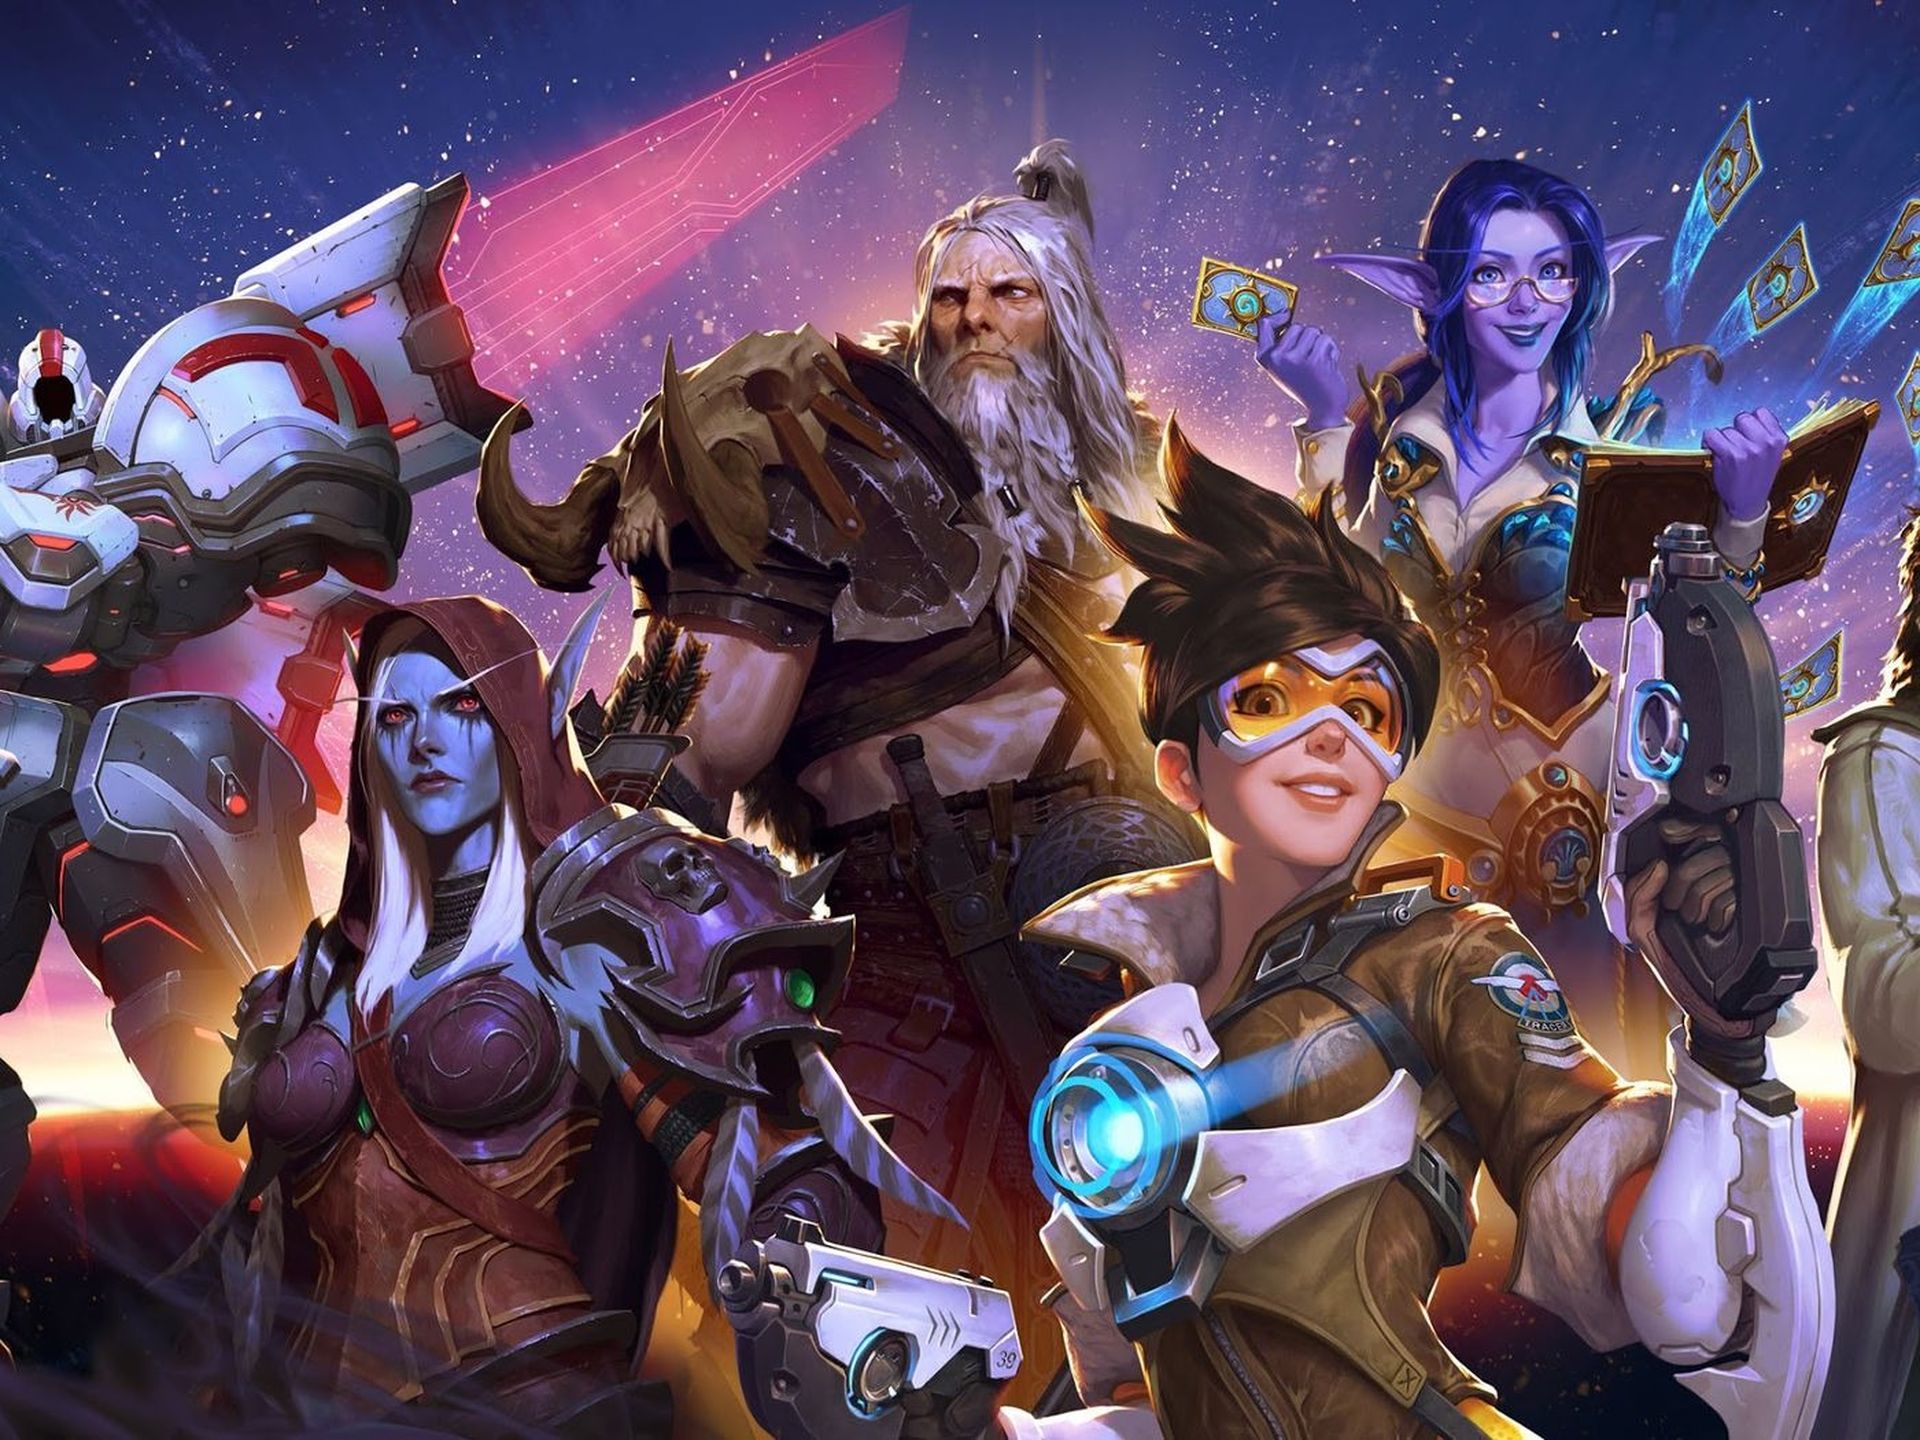 Blizzard DDoS attack affected the servers for all of their games and the servers are currently down. Here's when things are expected to return to normal.